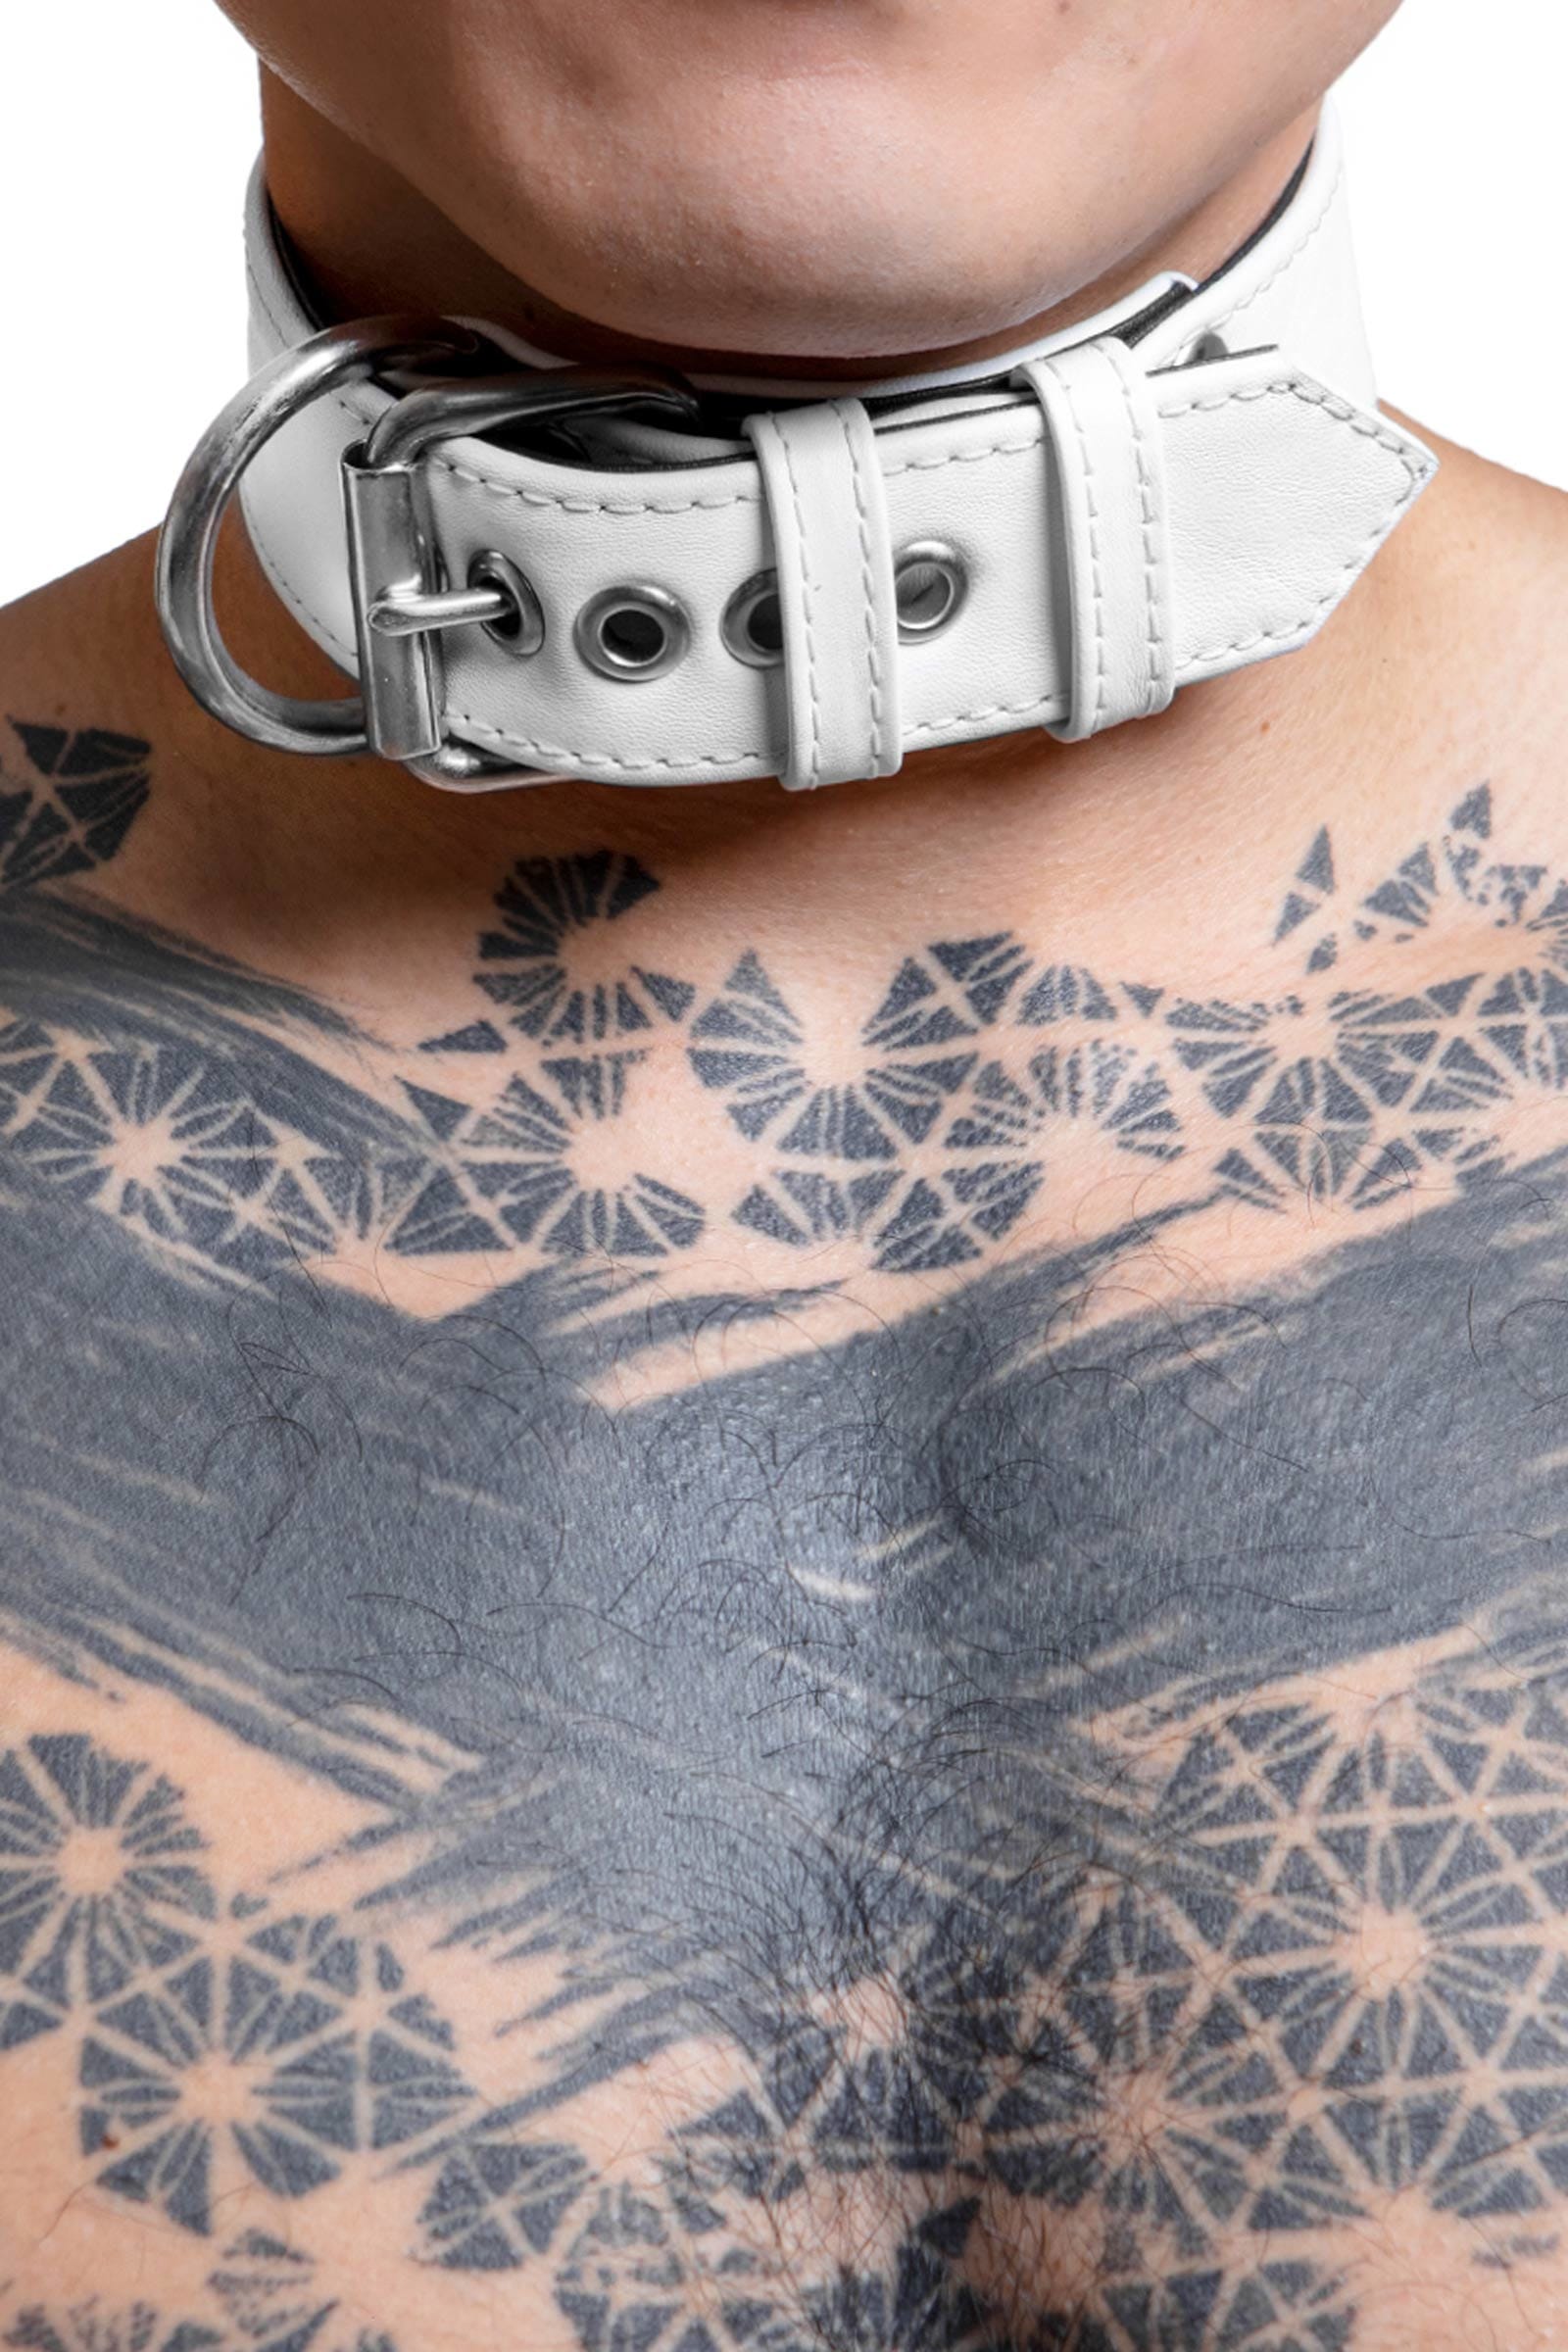 LEATHER JOCK - White & Stainless Steel